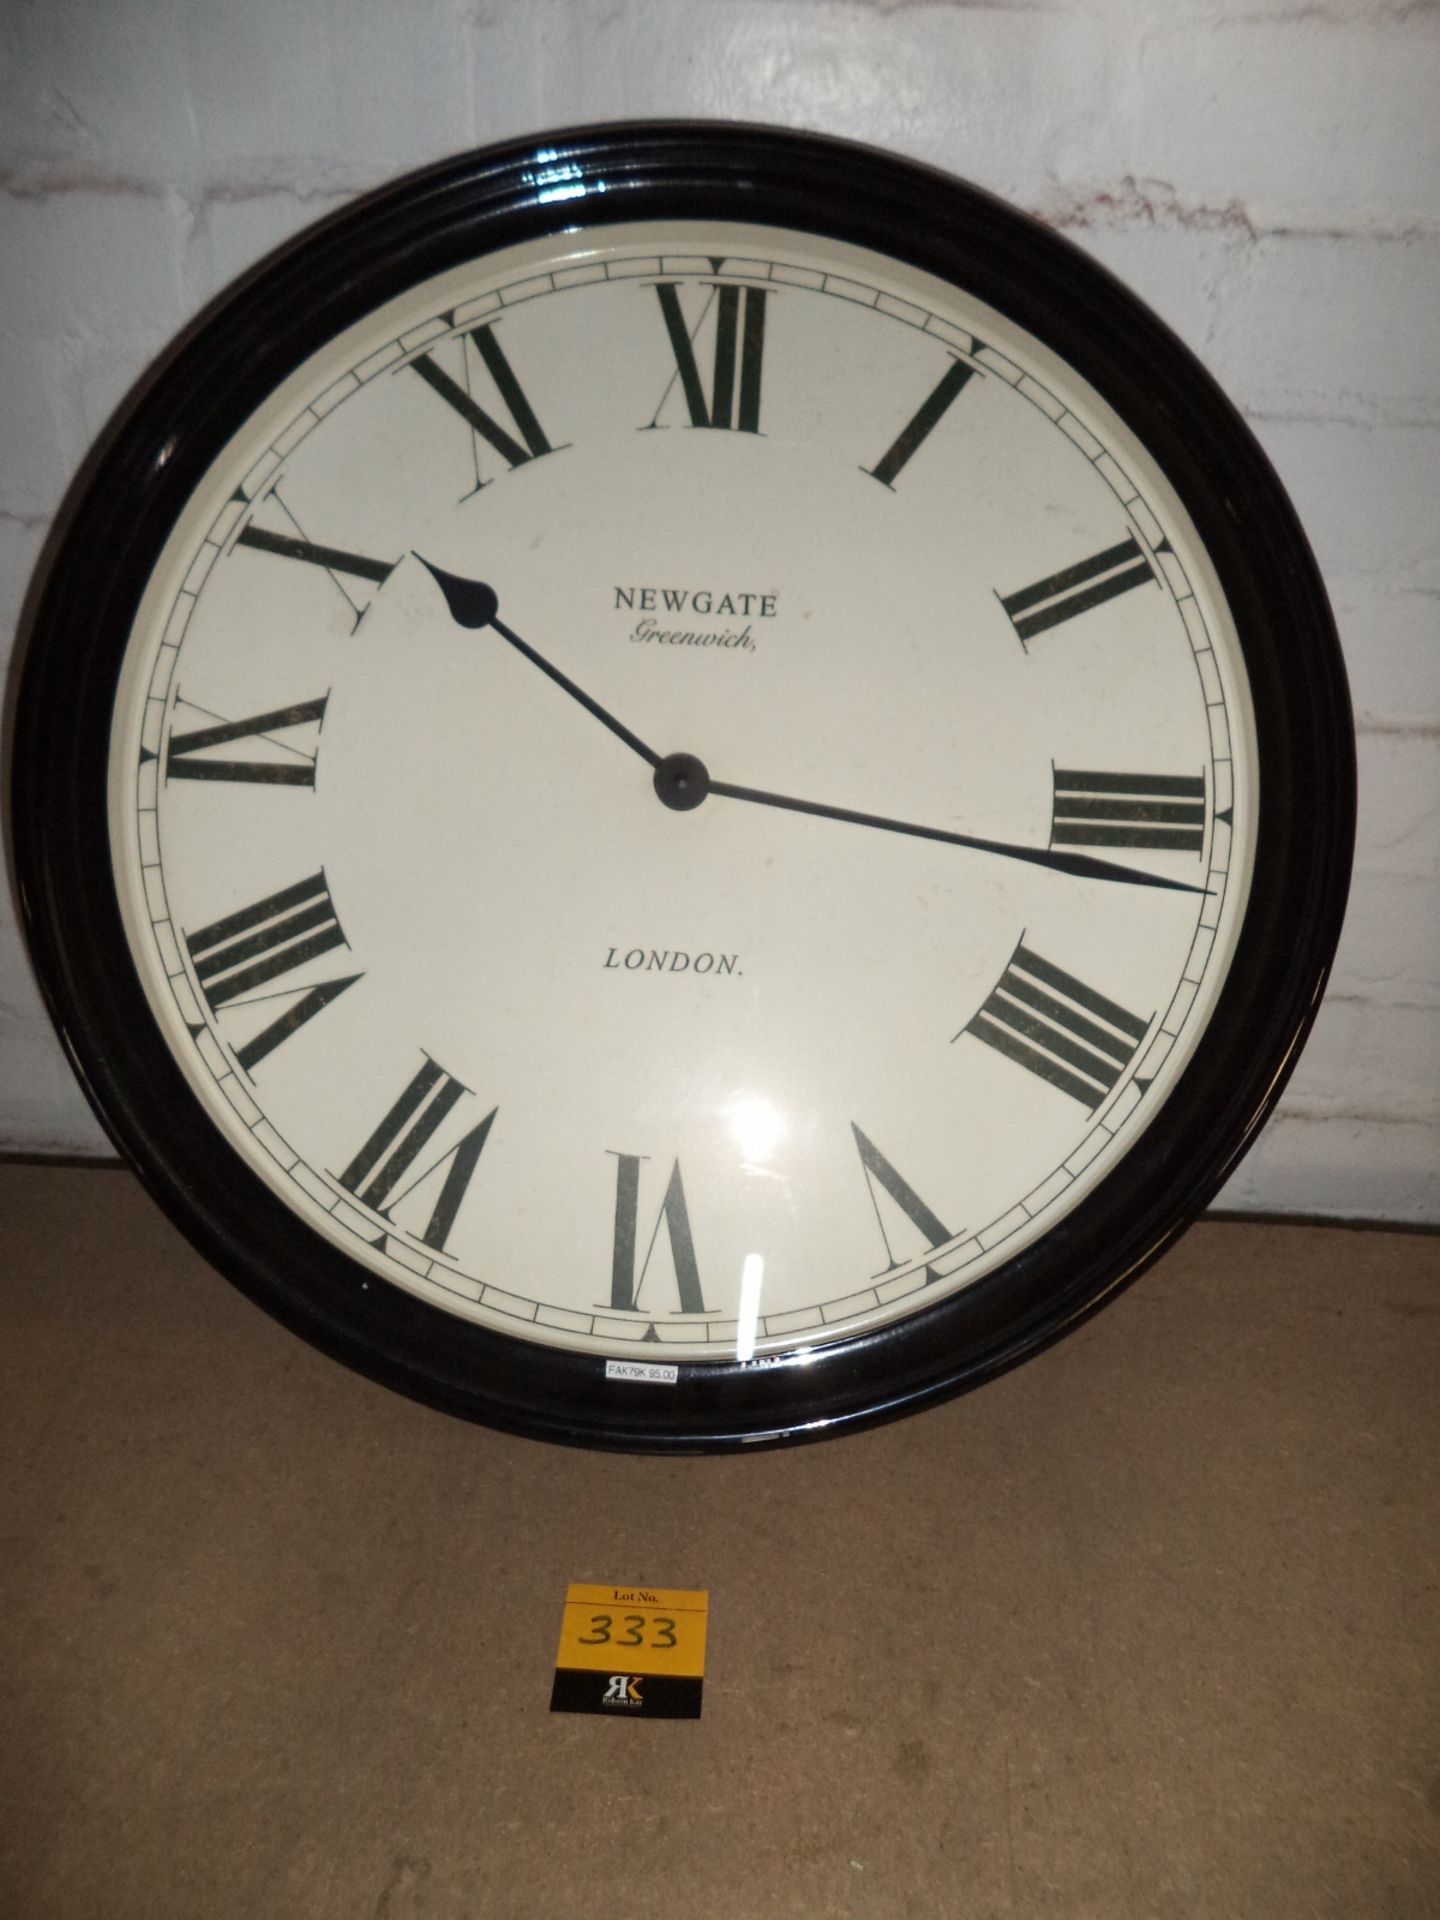 Large wall mountable clock marked Newgate Greenwich - retail price £95 IMPORTANT: Please remember - Image 2 of 2